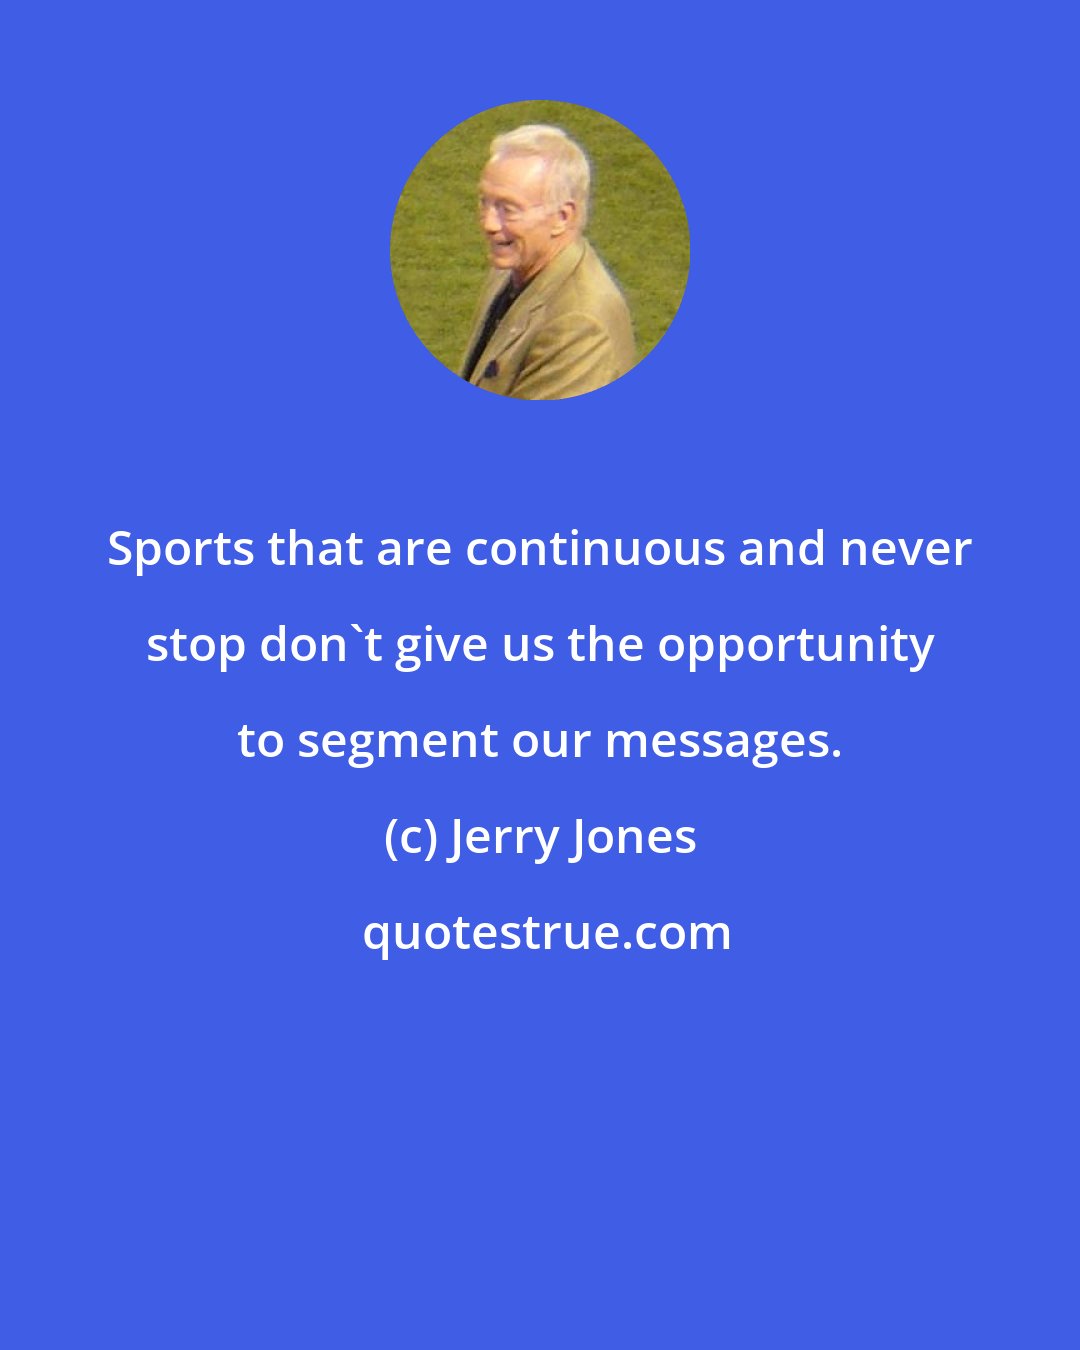 Jerry Jones: Sports that are continuous and never stop don't give us the opportunity to segment our messages.